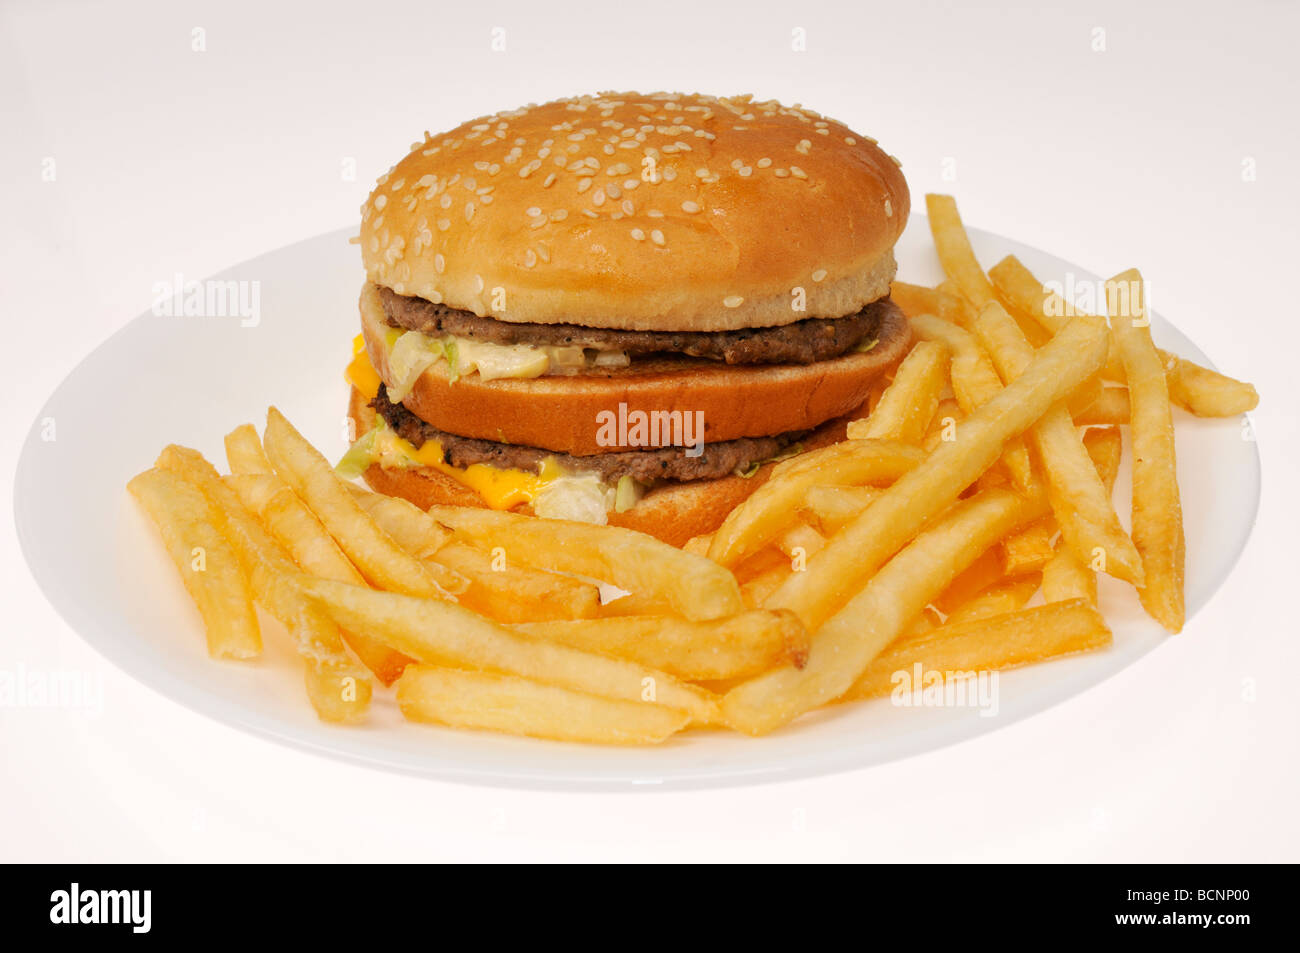 Mcdonalds Big Mac burger and chips on white plate Stock Photo